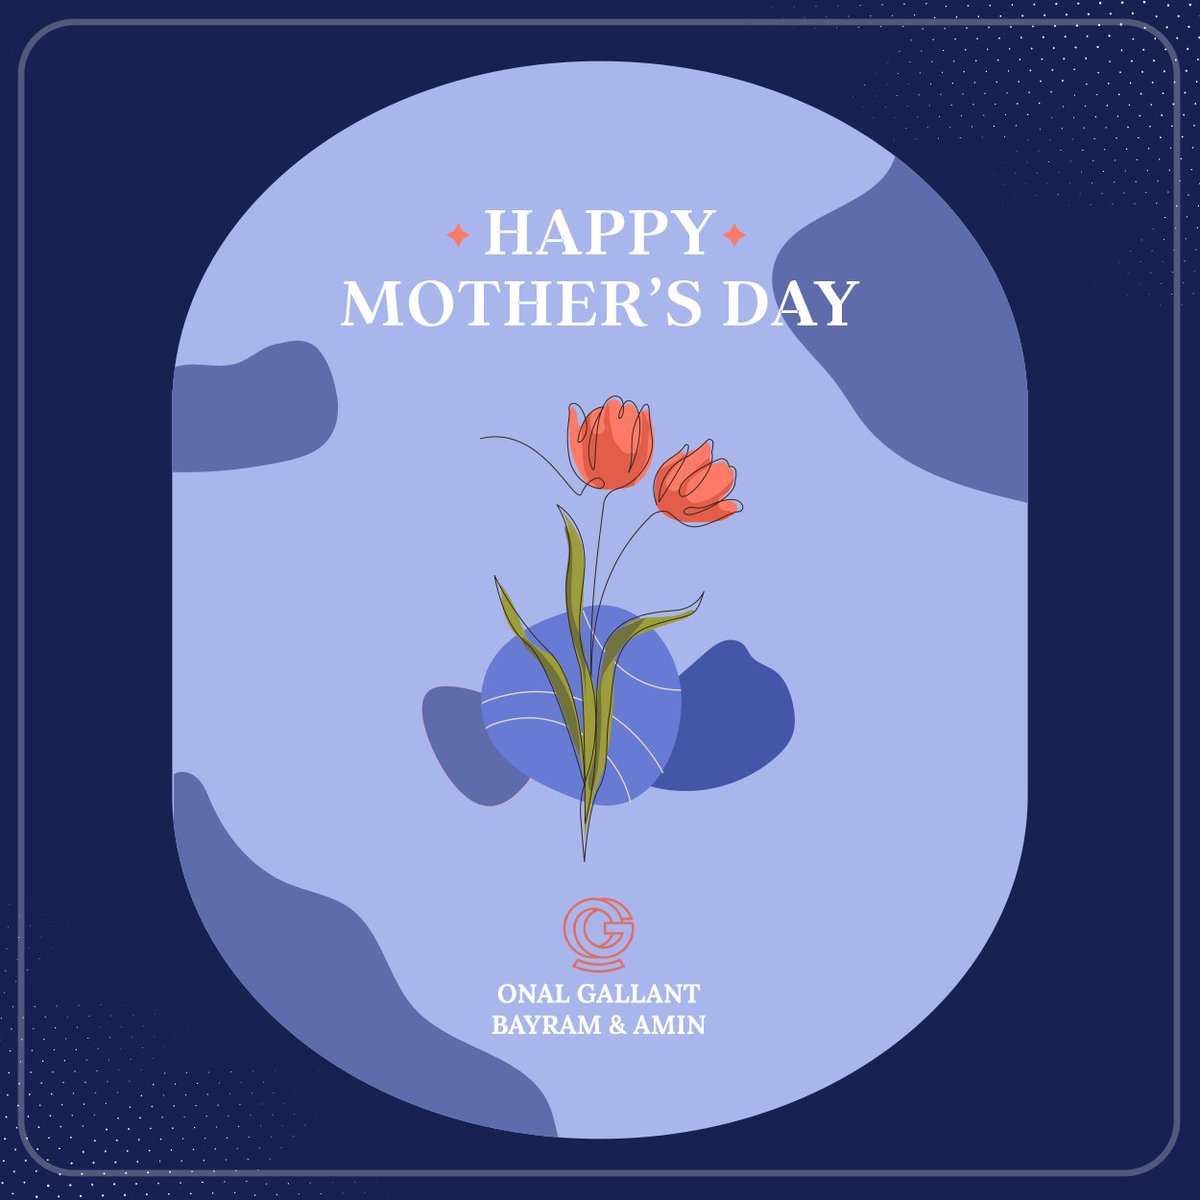 Happy Mother’s Day from Onal Gallant law firm ❤️

#OGPLawfirm #ExperiencedLawyer #BusinessLaw #CorporateLaw #RealEstateLaw #CorporateLaw #Contracts #Leases #LeaseContracts #Agreements #RealEstate #MothersDay